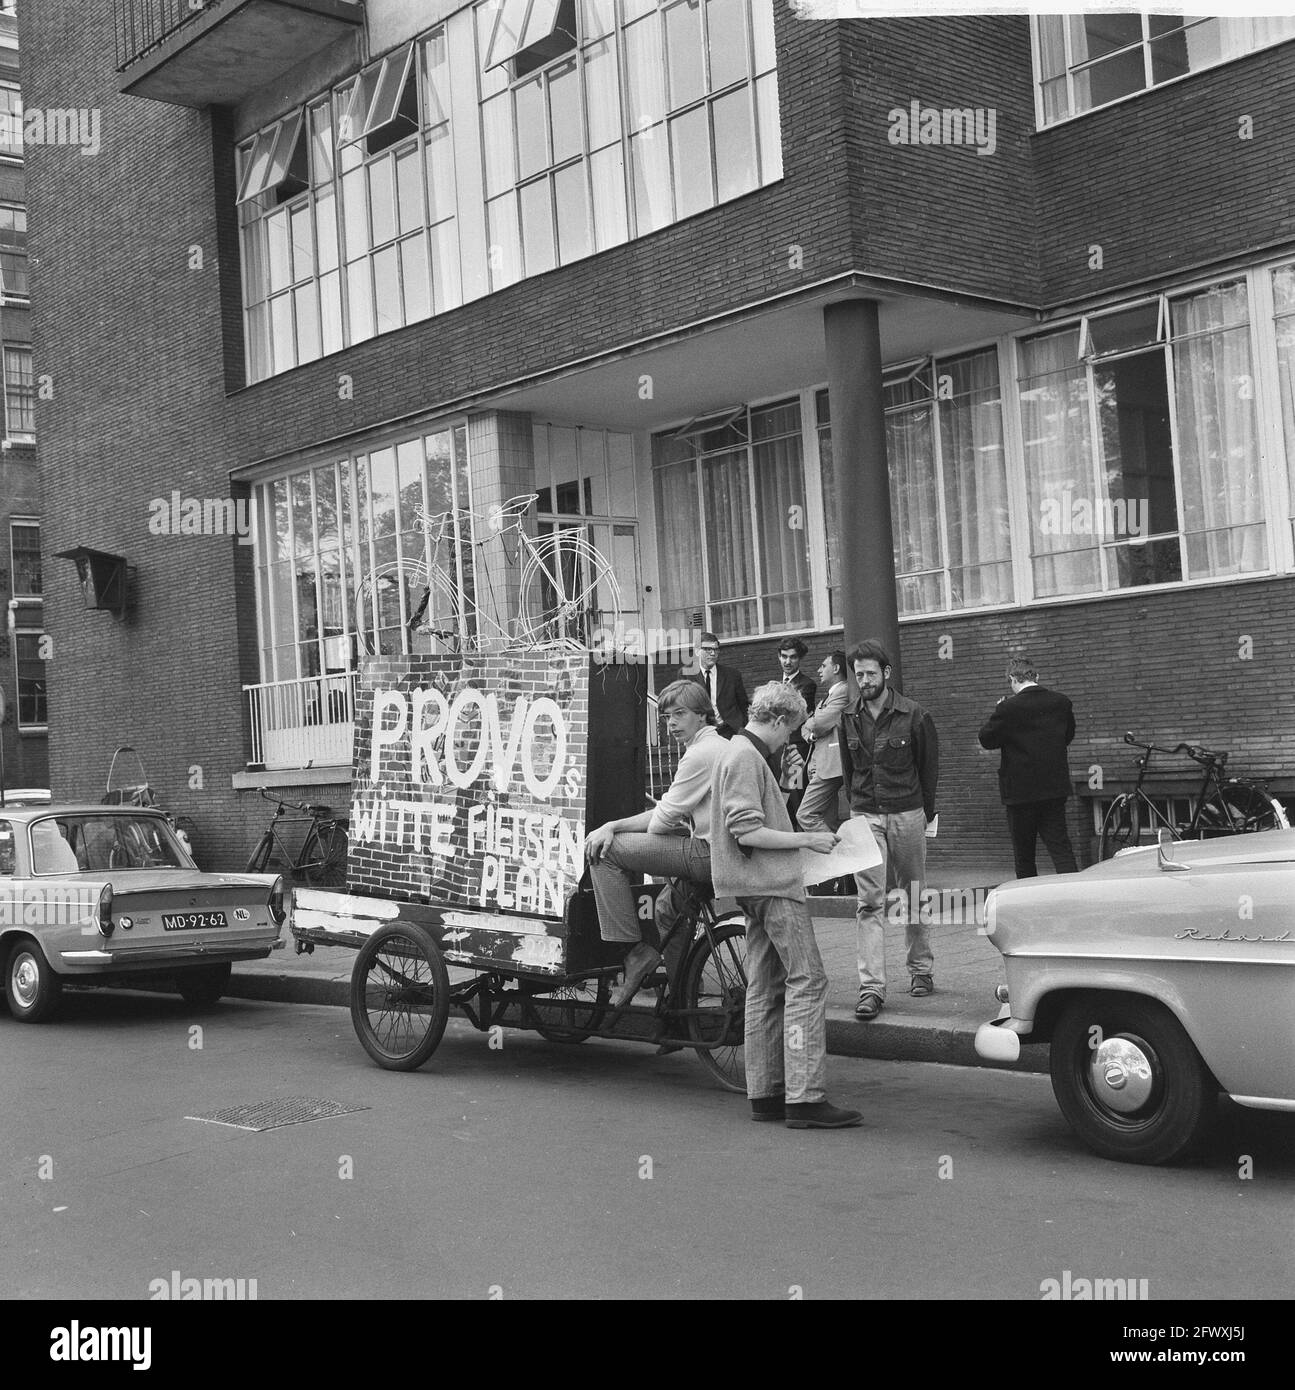 Provos at chief of police, provo cargo bike, August 14, 1965, bicycles, chief of police, police, protest movements, The Netherlands, 20th century pres Stock Photo